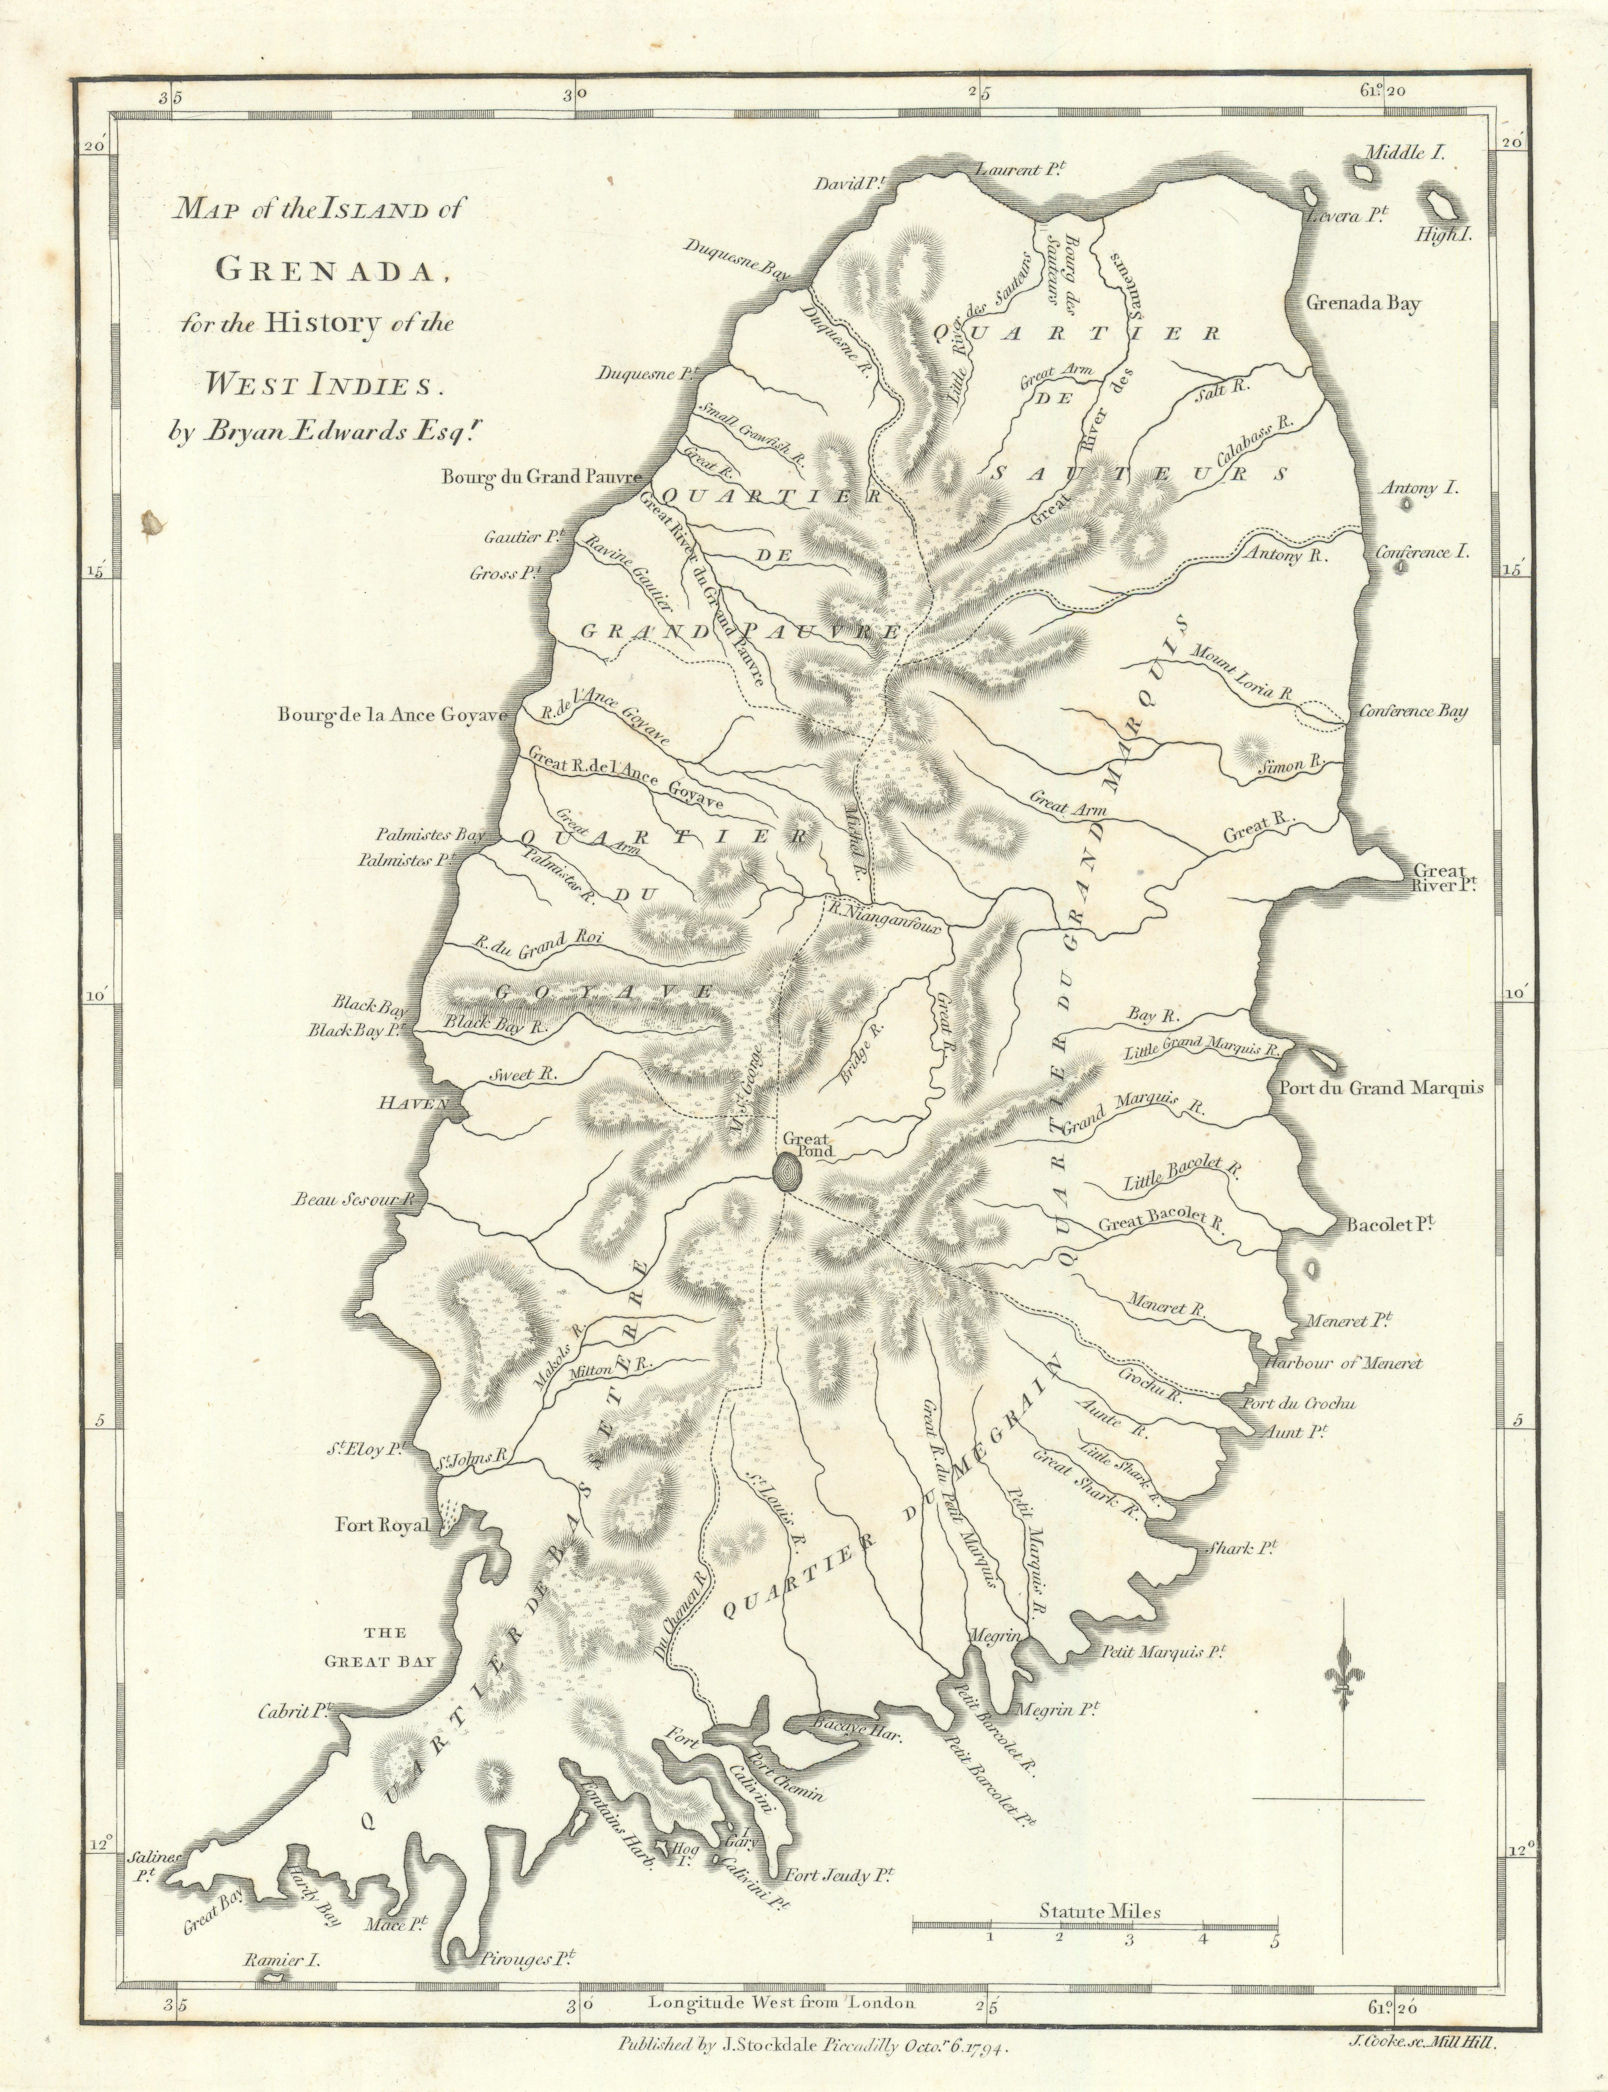 Associate Product 'A Map of the Island of GRENADA', by Bryan EDWARDS. West Indies. Caribbean 1794